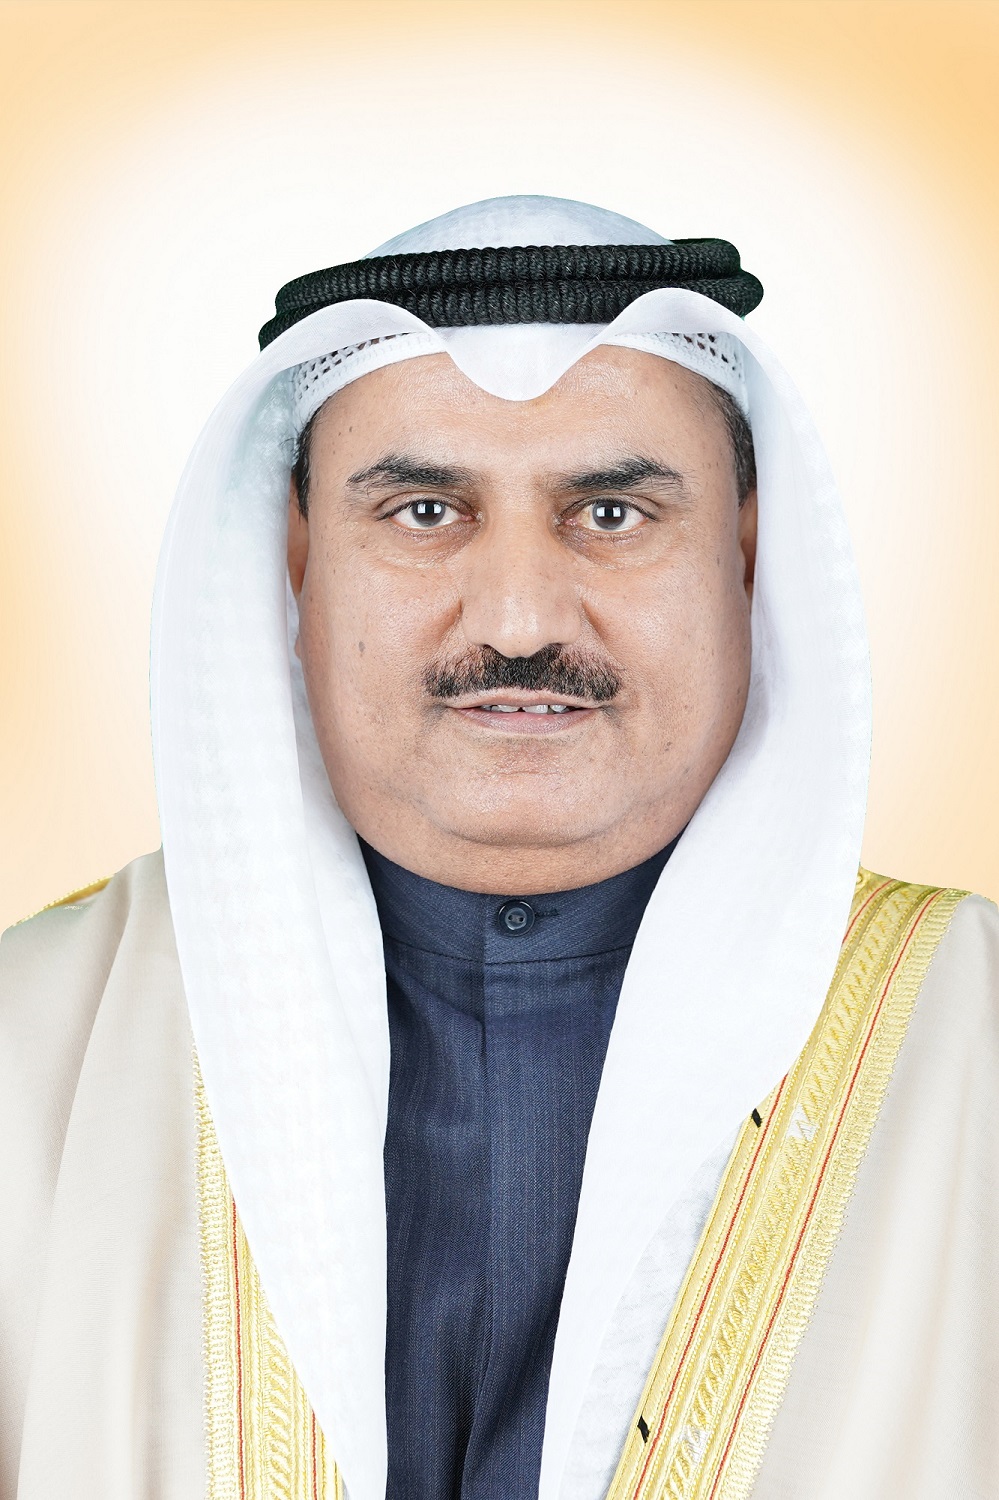 Education Minister and Minister of Higher Education Dr. Saud Al-Harbi